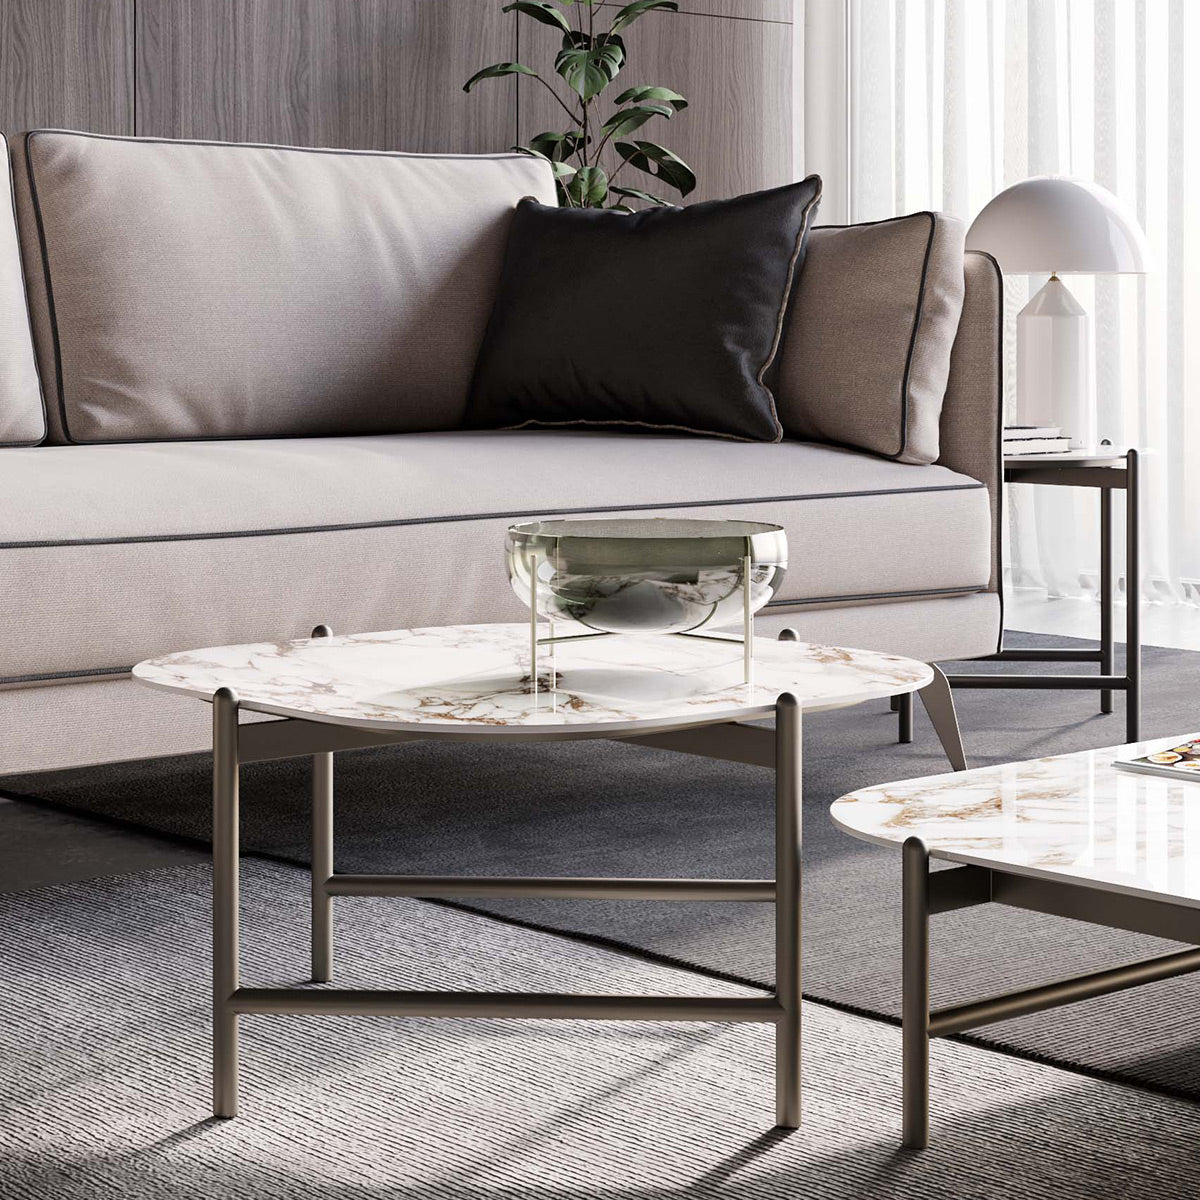 Supernova Coffee Table by Dall'Agnese